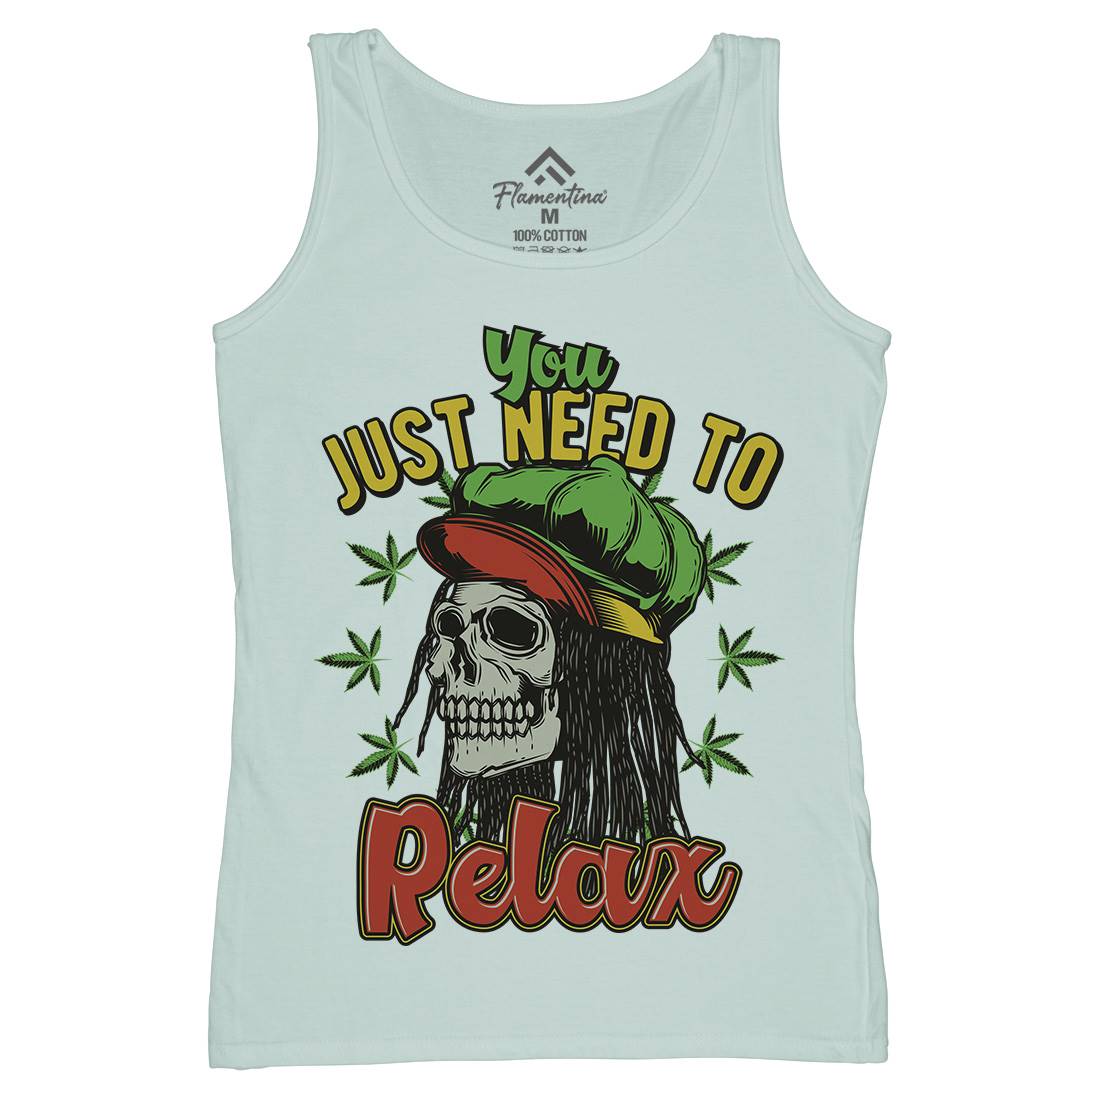 Need To Relax Womens Organic Tank Top Vest Drugs B804